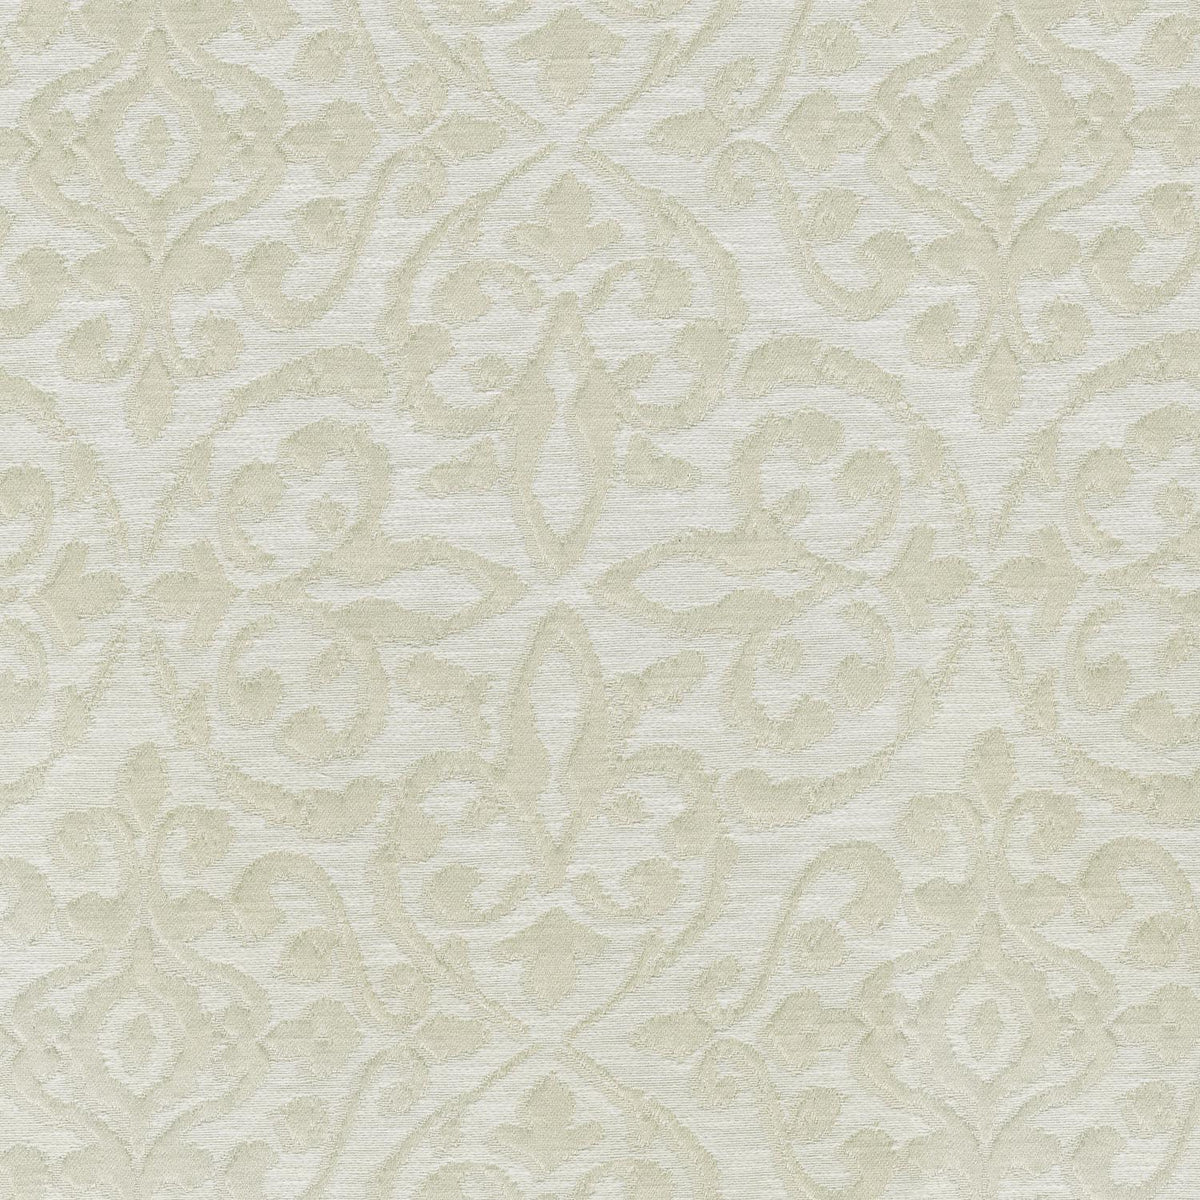 P/K Lifestyles Coralie - Pearl 410010 Fabric Swatch